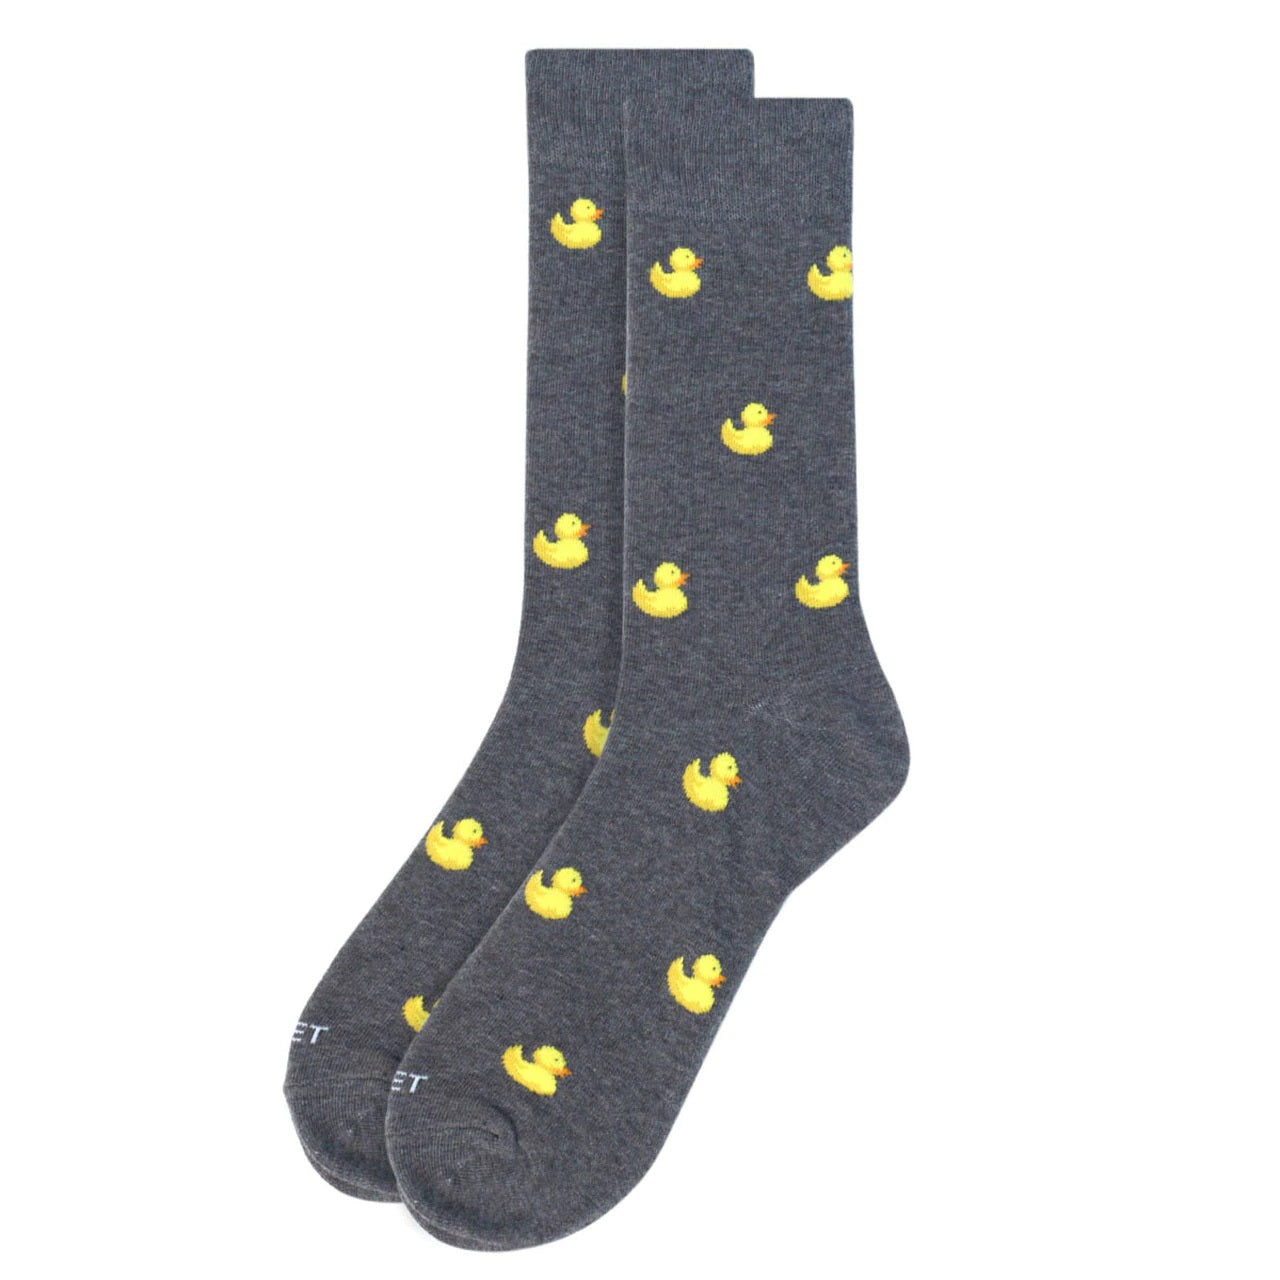 MashasCorner.com   Men's Rubber Duck Premium Collection Novelty Socks  Who said that socks have to be boring? Colorful, novelty or funny socks is the way to go. That’s why we have a wide range of different colors and design for the different passions and interest. They could be your perfect gift choices for all occasions.  78% Cotton, 19% Polyester, 3% spandex Our Finest Socks: Made from top quality material Sock size: 10-13 Shoe size: 6-12.5 Machine wash, tumble dry low Imported